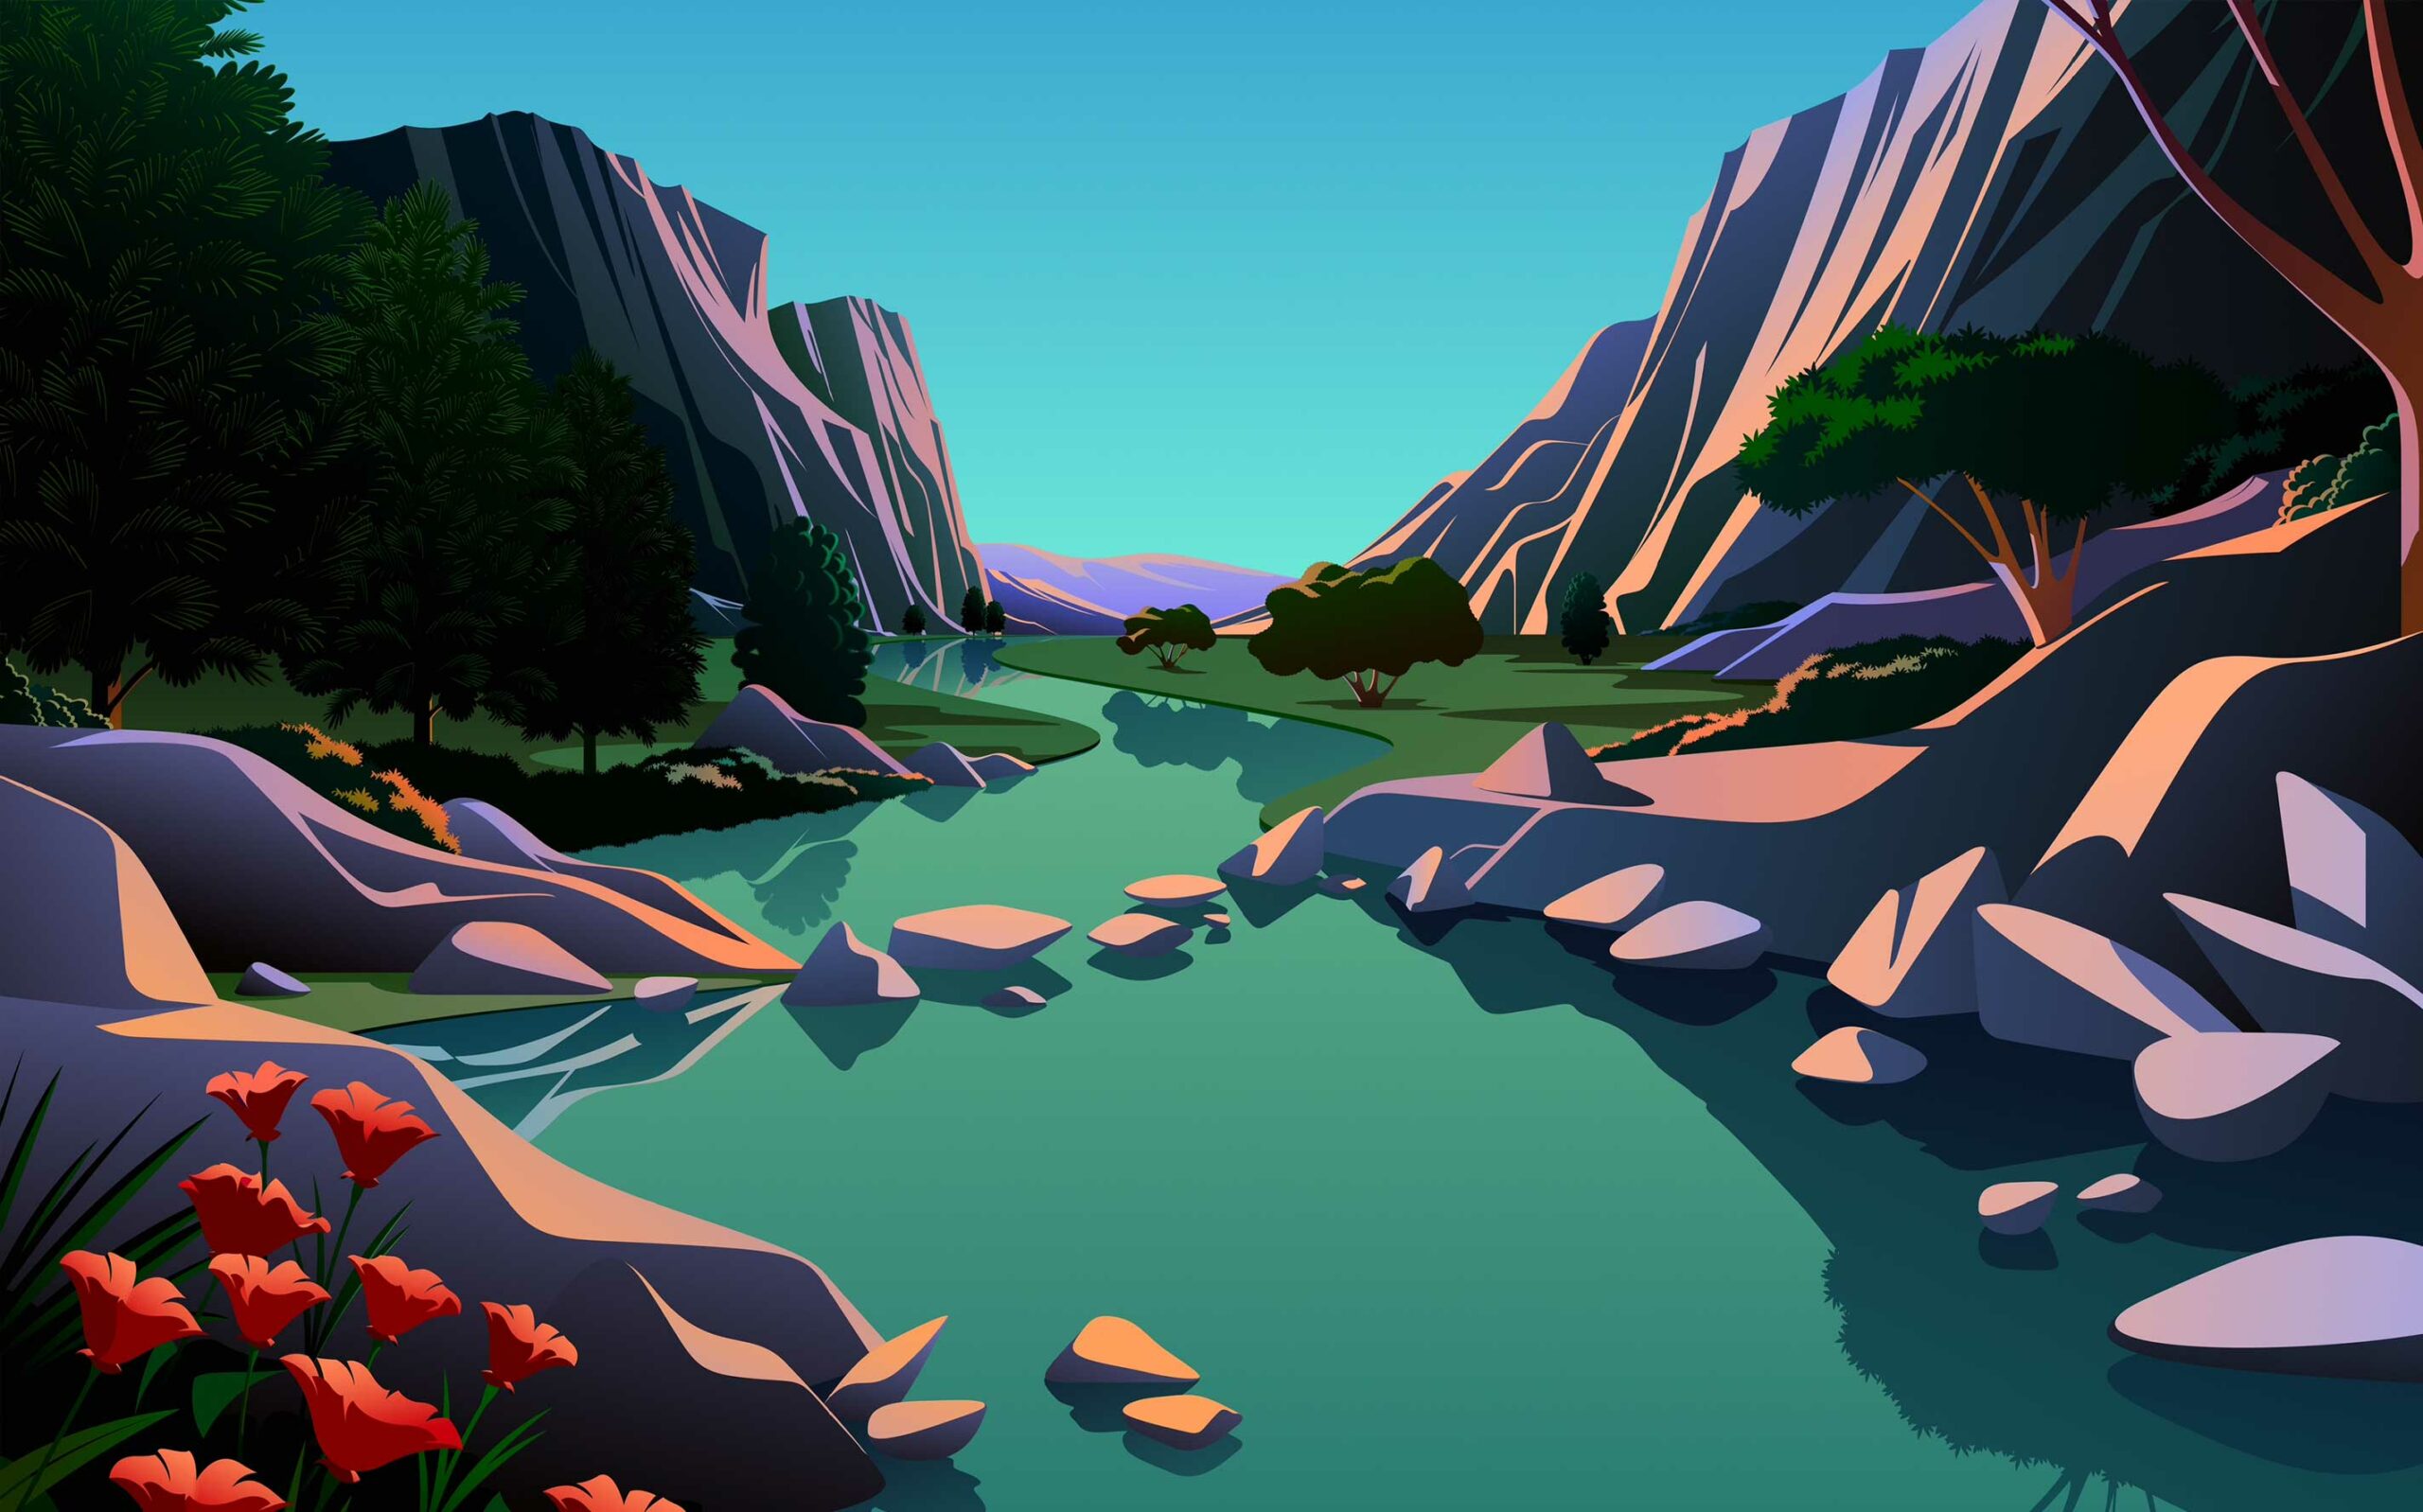 macOS Big Sur brings several cool new wallpapers to the Mac